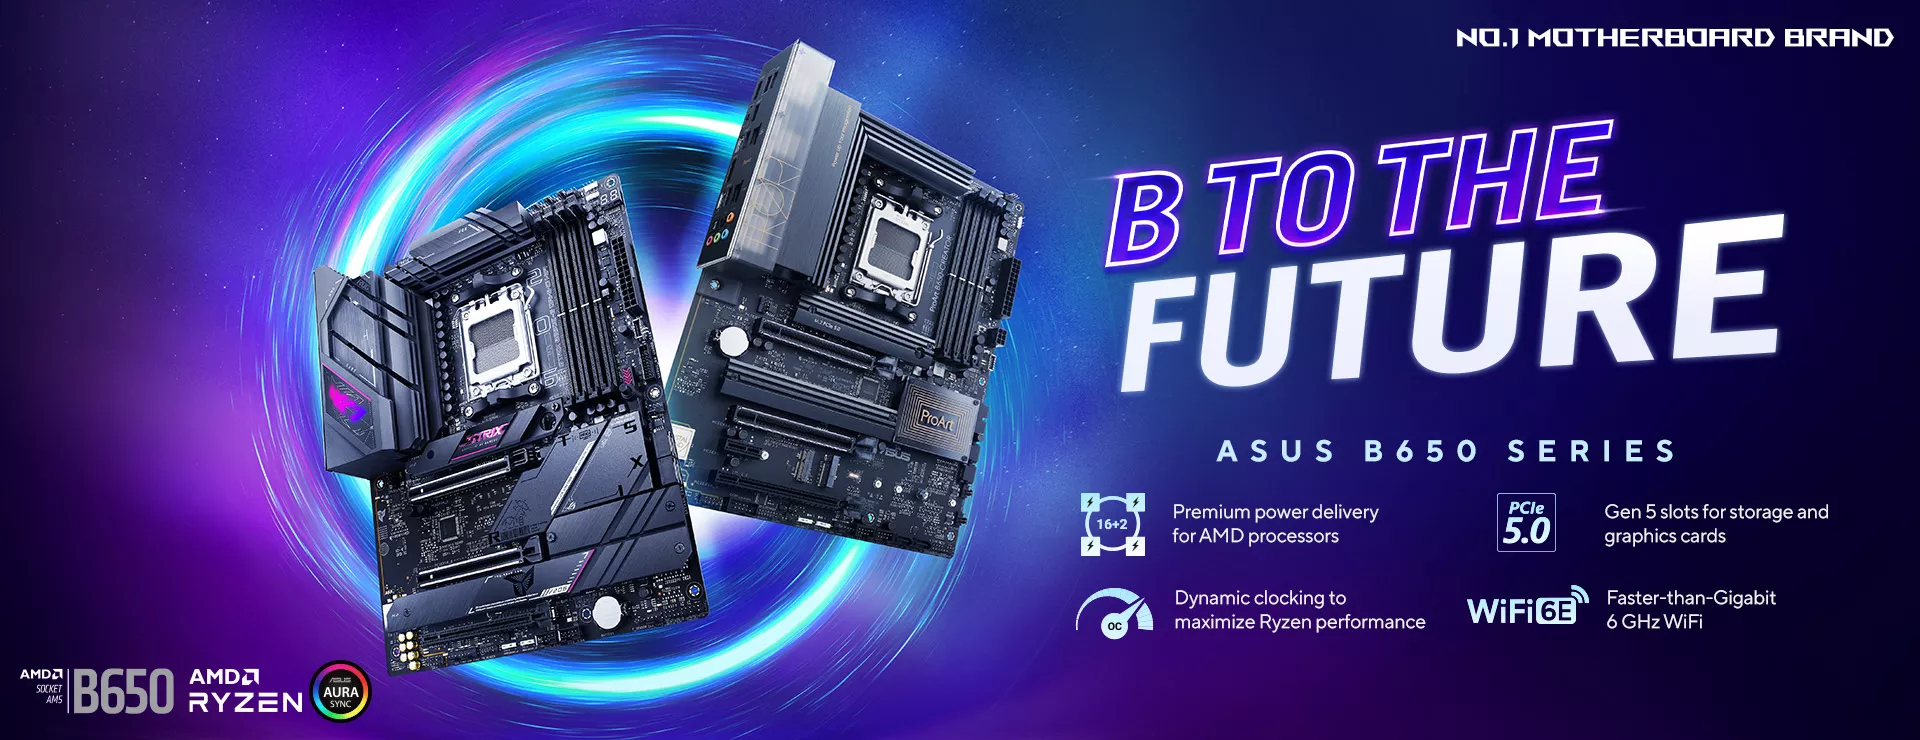 ASUS B650 SERIES B to the Future